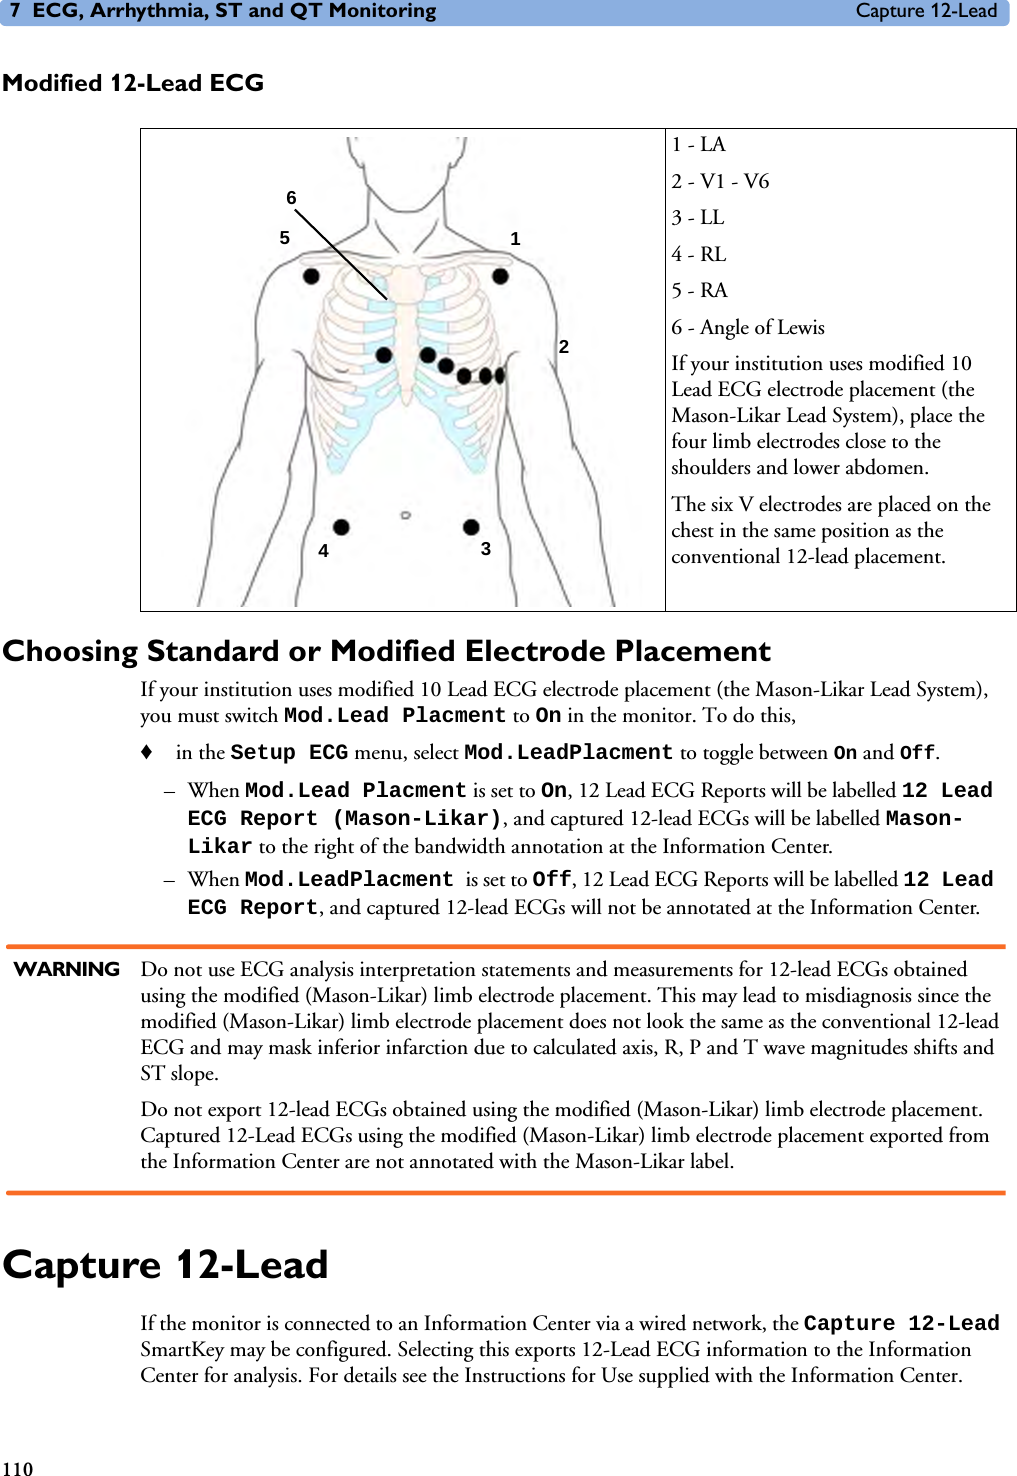 7 ECG, Arrhythmia, ST and QT Monitoring Capture 12-Lead110Modified 12-Lead ECGChoosing Standard or Modified Electrode PlacementIf your institution uses modified 10 Lead ECG electrode placement (the Mason-Likar Lead System), you must switch Mod.Lead Placment to On in the monitor. To do this,♦in the Setup ECG menu, select Mod.LeadPlacment to toggle between On and Off.–When Mod.Lead Placment is set to On, 12 Lead ECG Reports will be labelled 12 Lead ECG Report (Mason-Likar), and captured 12-lead ECGs will be labelled Mason-Likar to the right of the bandwidth annotation at the Information Center.–When Mod.LeadPlacment is set to Off, 12 Lead ECG Reports will be labelled 12 Lead ECG Report, and captured 12-lead ECGs will not be annotated at the Information Center.WARNING Do not use ECG analysis interpretation statements and measurements for 12-lead ECGs obtained using the modified (Mason-Likar) limb electrode placement. This may lead to misdiagnosis since the modified (Mason-Likar) limb electrode placement does not look the same as the conventional 12-lead ECG and may mask inferior infarction due to calculated axis, R, P and T wave magnitudes shifts and ST slope. Do not export 12-lead ECGs obtained using the modified (Mason-Likar) limb electrode placement. Captured 12-Lead ECGs using the modified (Mason-Likar) limb electrode placement exported from the Information Center are not annotated with the Mason-Likar label. Capture 12-LeadIf the monitor is connected to an Information Center via a wired network, the Capture 12-Lead SmartKey may be configured. Selecting this exports 12-Lead ECG information to the Information Center for analysis. For details see the Instructions for Use supplied with the Information Center. 1 - LA2 - V1 - V63 - LL4 - RL5 - RA6 - Angle of LewisIf your institution uses modified 10 Lead ECG electrode placement (the Mason-Likar Lead System), place the four limb electrodes close to the shoulders and lower abdomen.The six V electrodes are placed on the chest in the same position as the conventional 12-lead placement.1 35462